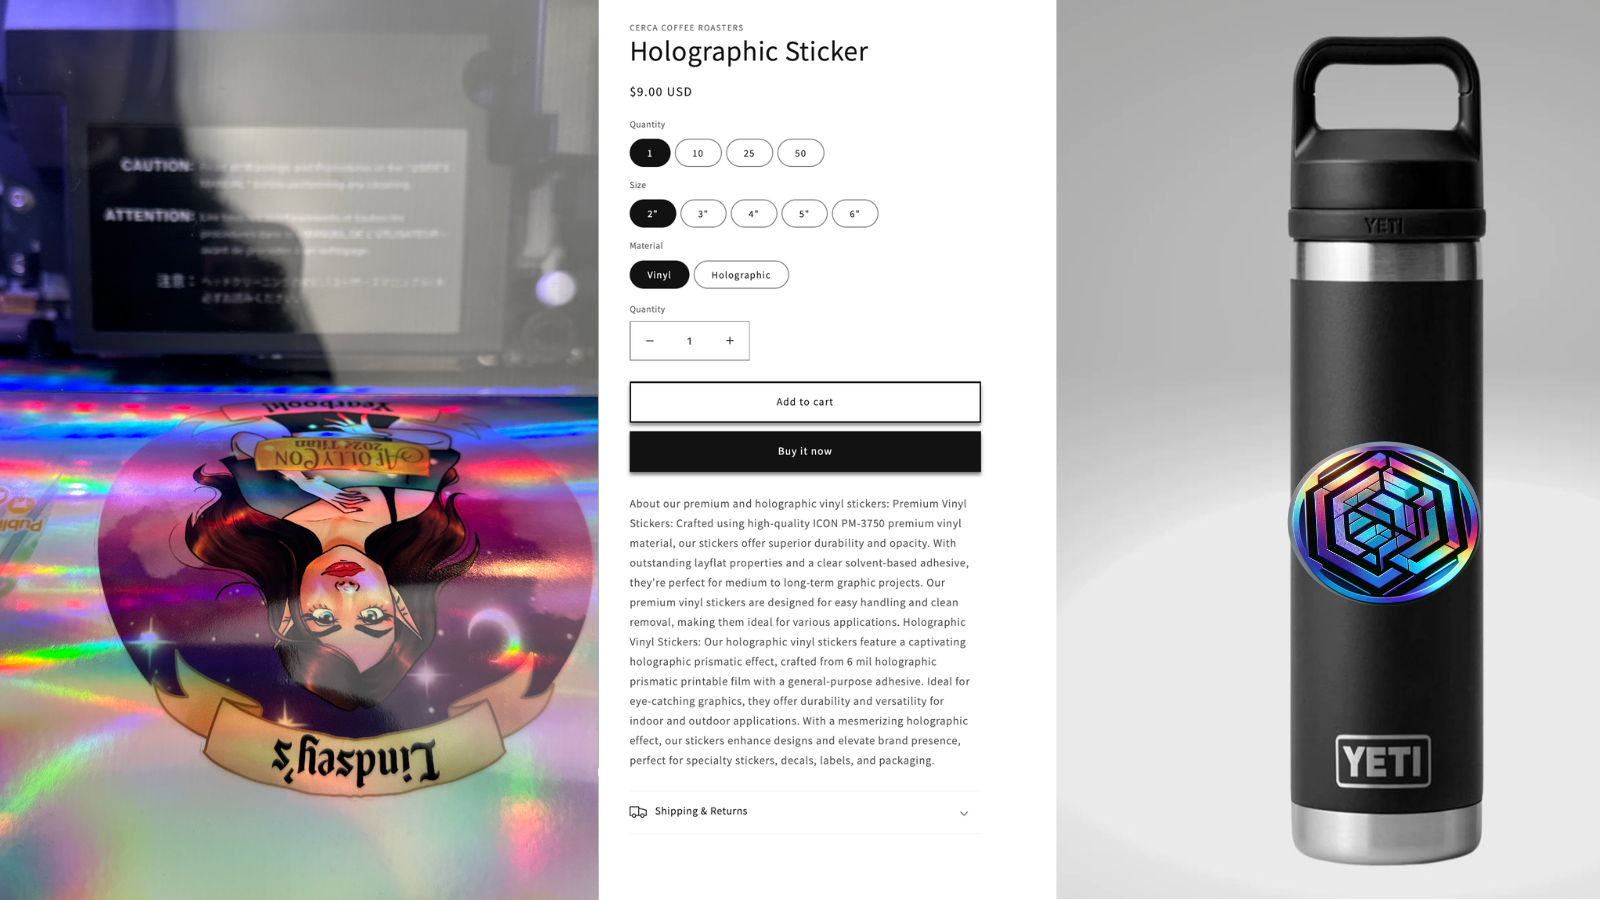 Holographic & vinyl sticker options for your customers.